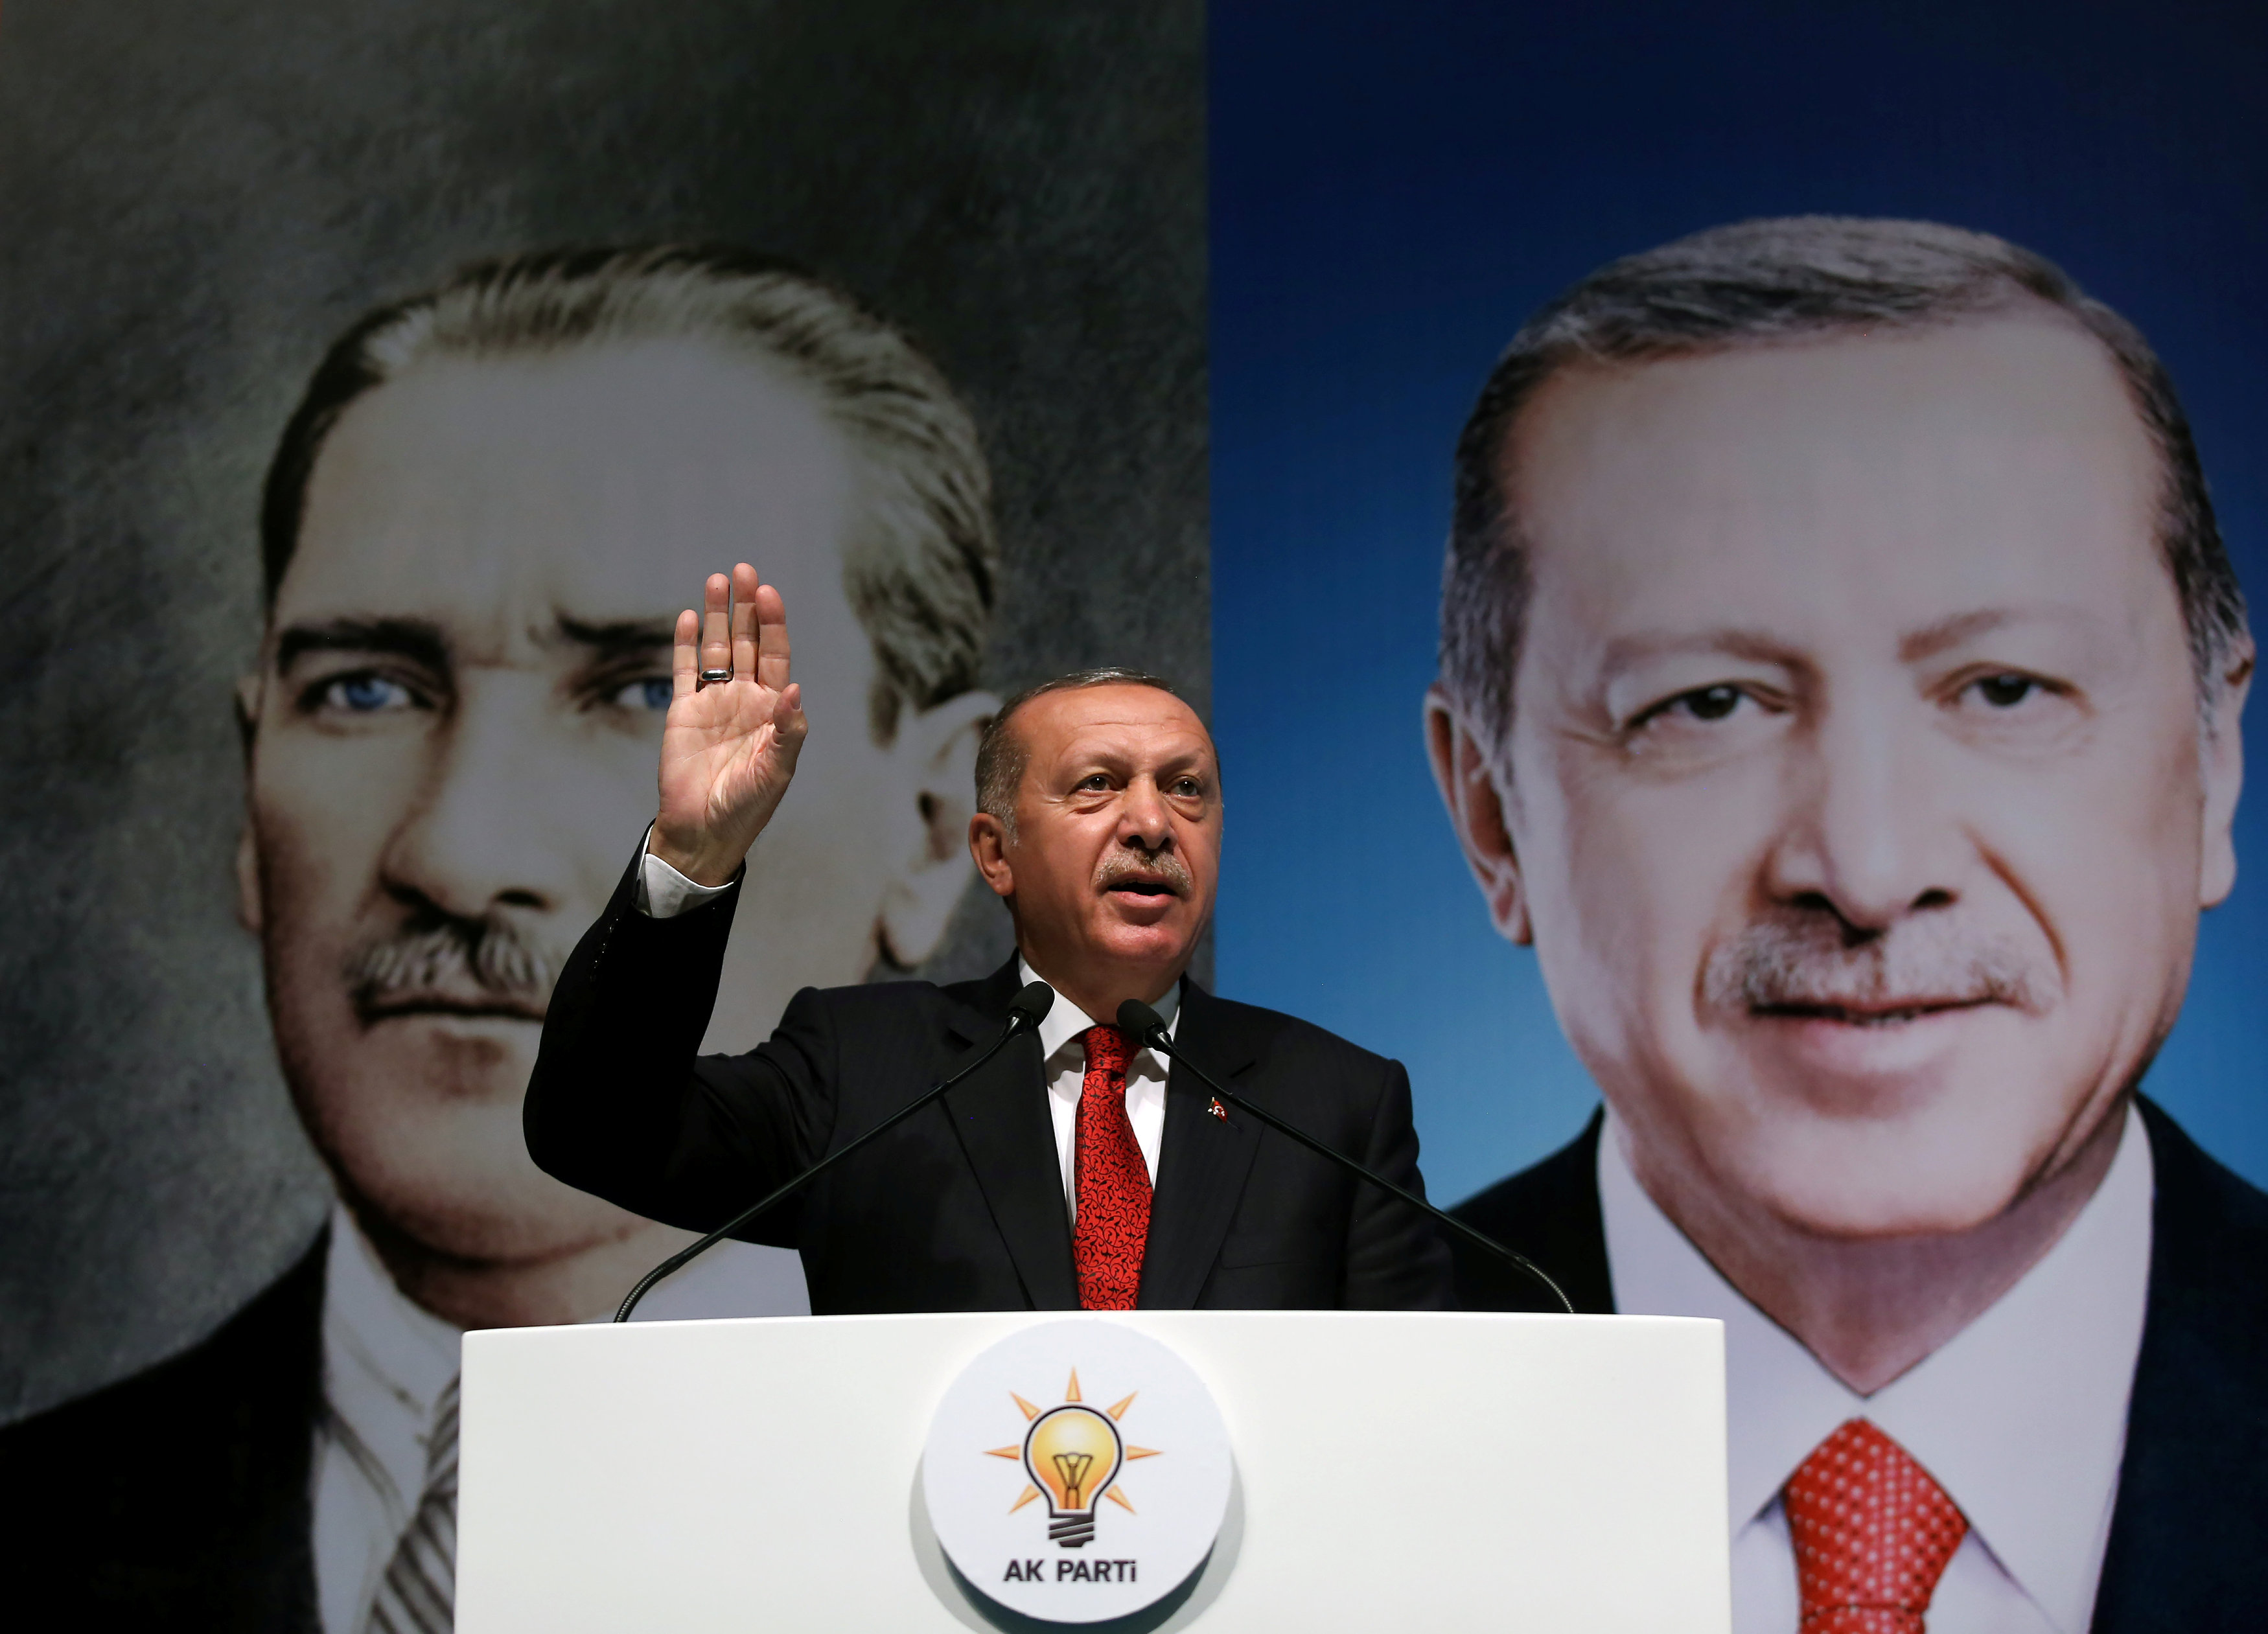 Editorial: The freeing of the two Greek officers and Erdogan’s plans